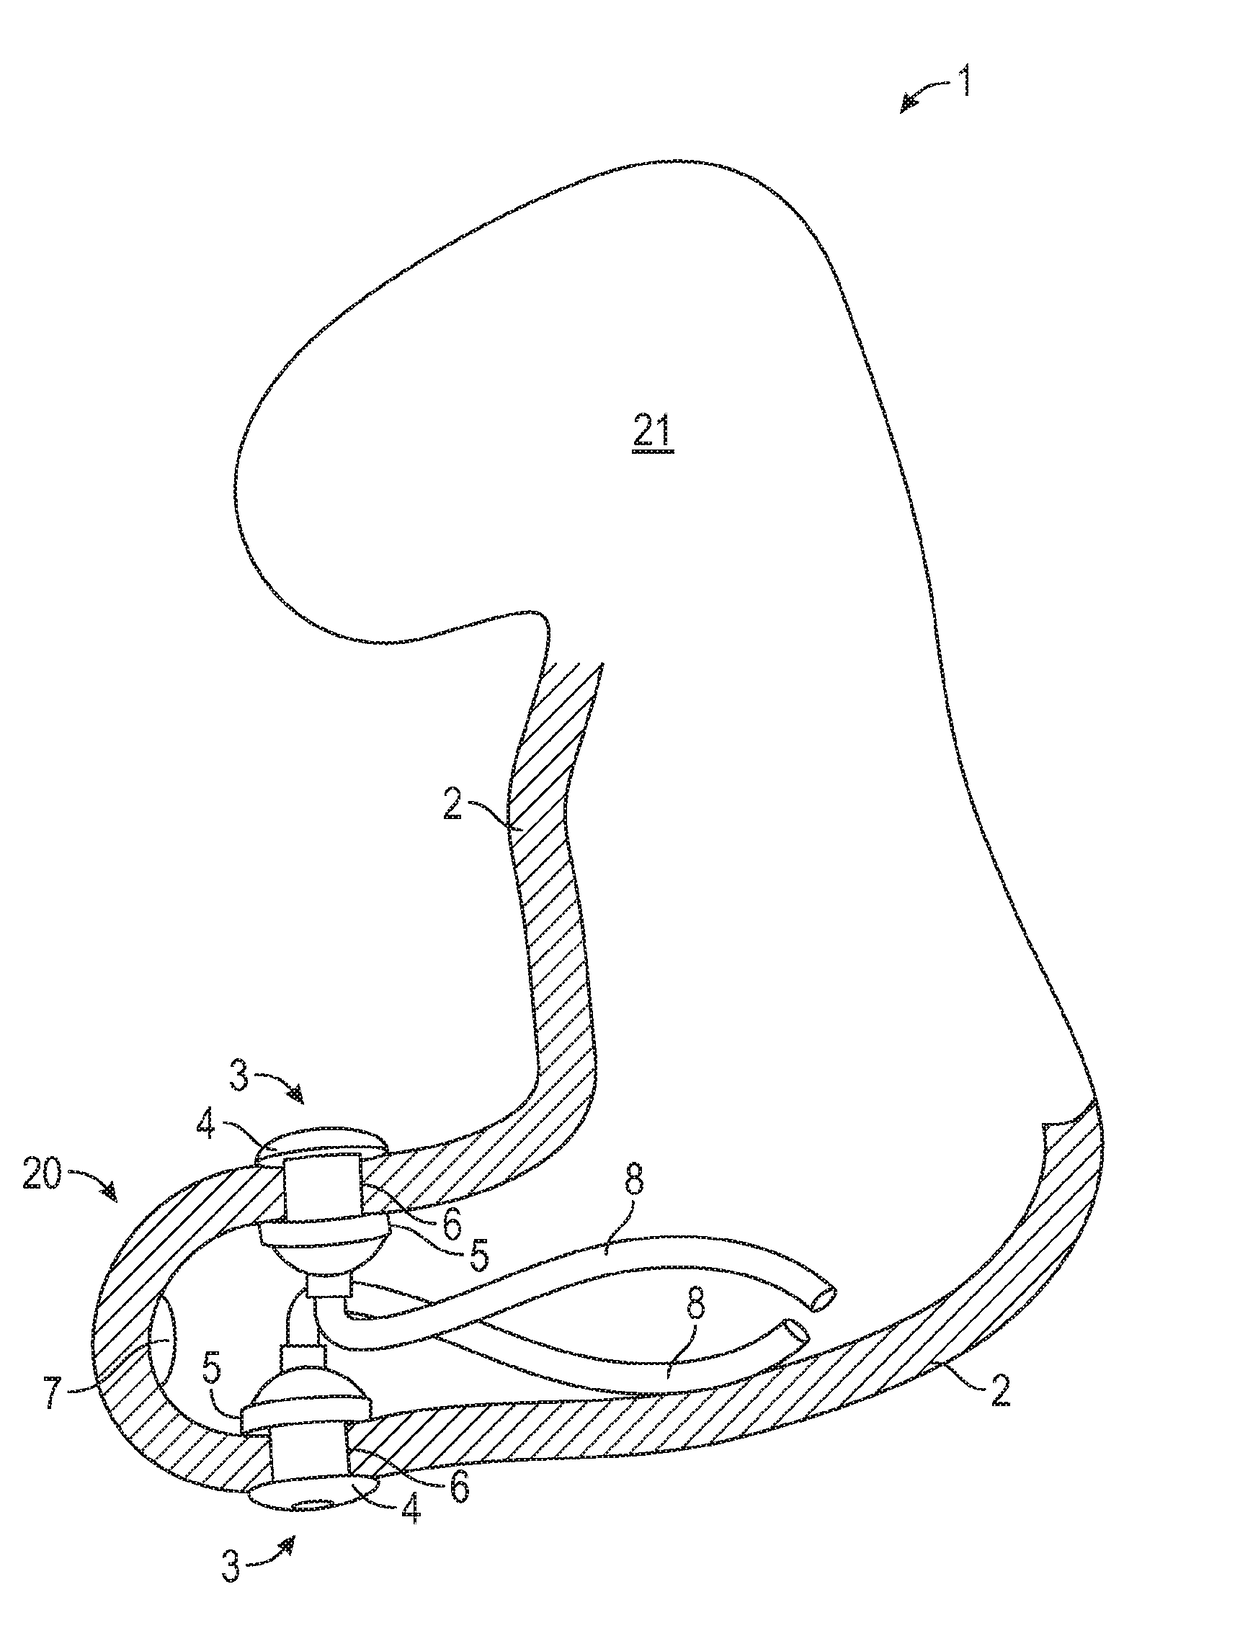 Ear canal plug for detecting bio-electrical signals